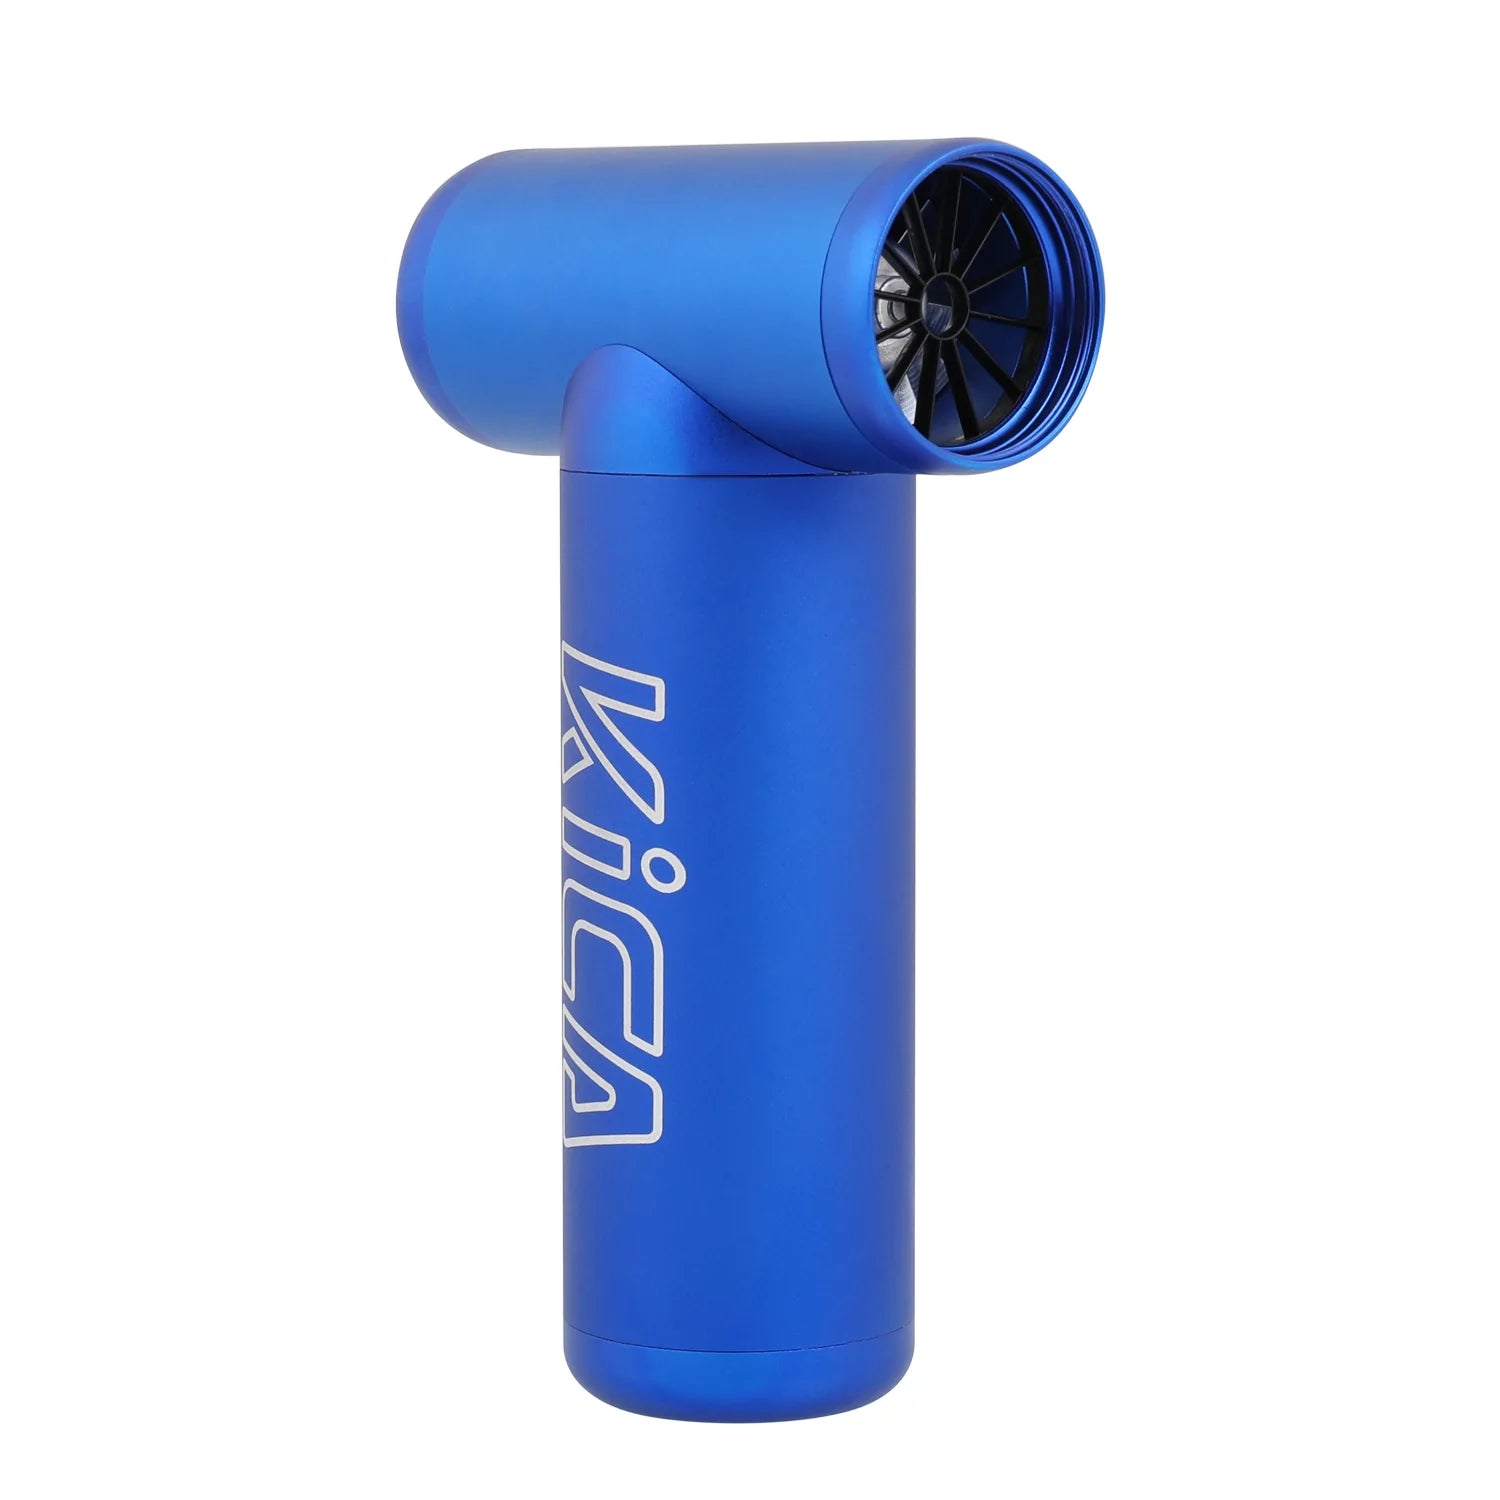 KiCA Multi-Functional Jetfan Compressed Air Duster Air Blowser KC1